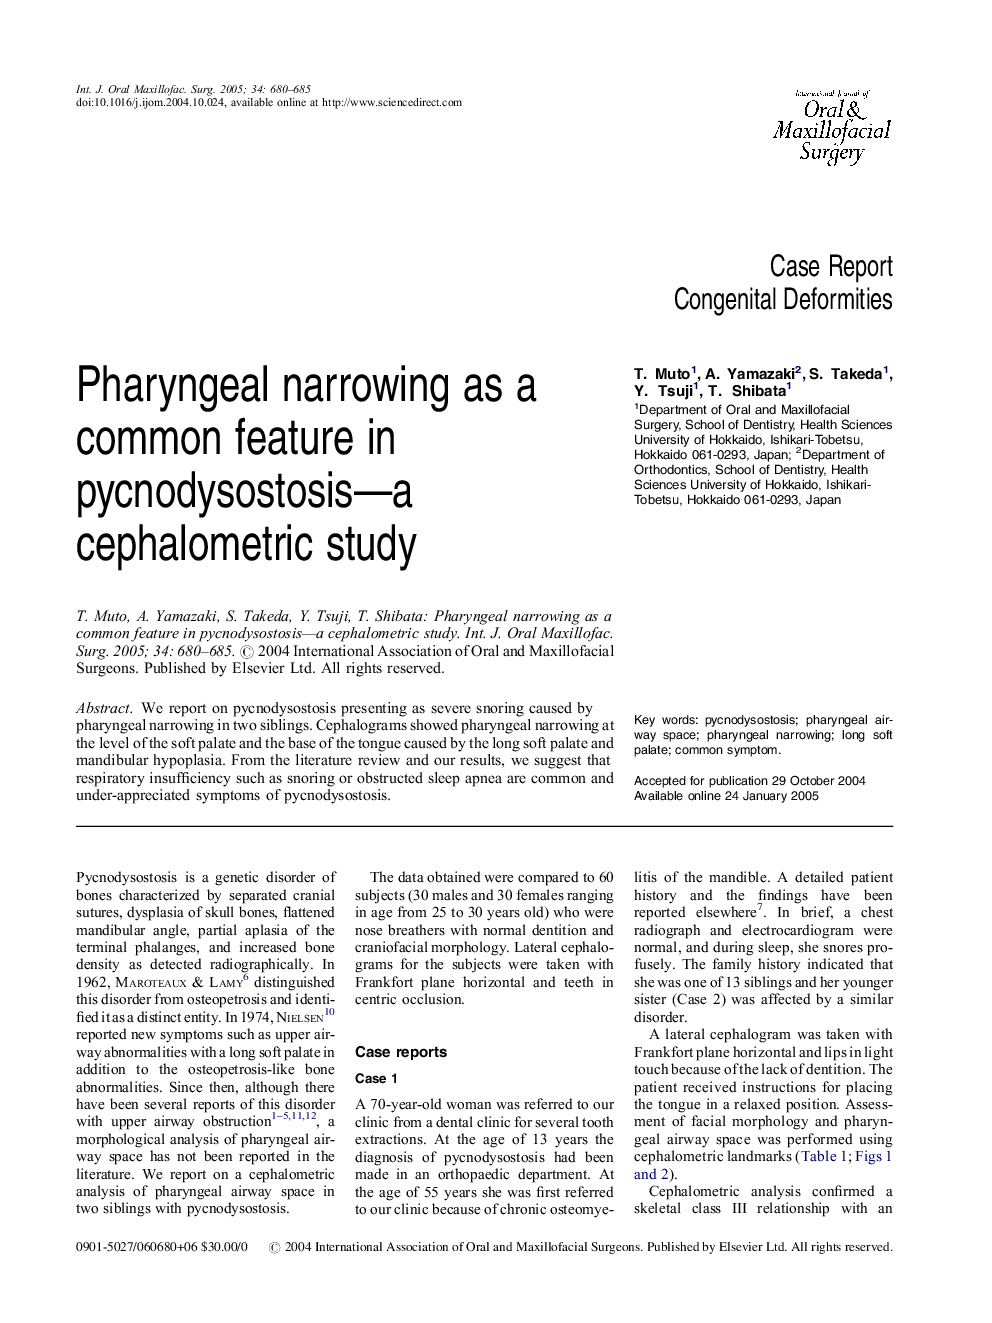 Pharyngeal narrowing as a common feature in pycnodysostosis-a cephalometric study